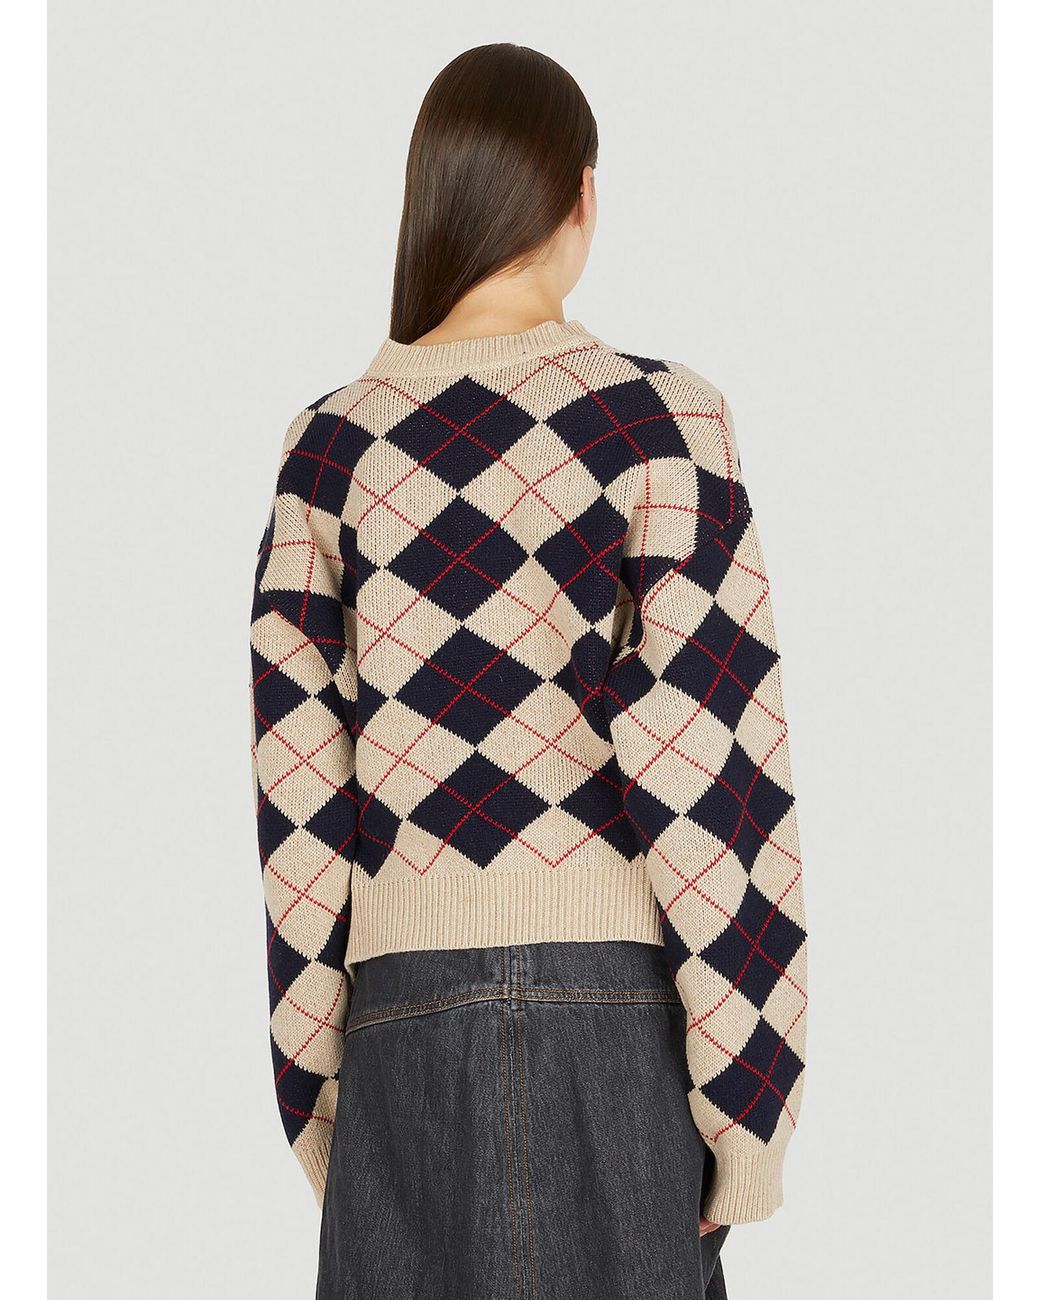 ROKH Argyle Sweater in Natural | Lyst